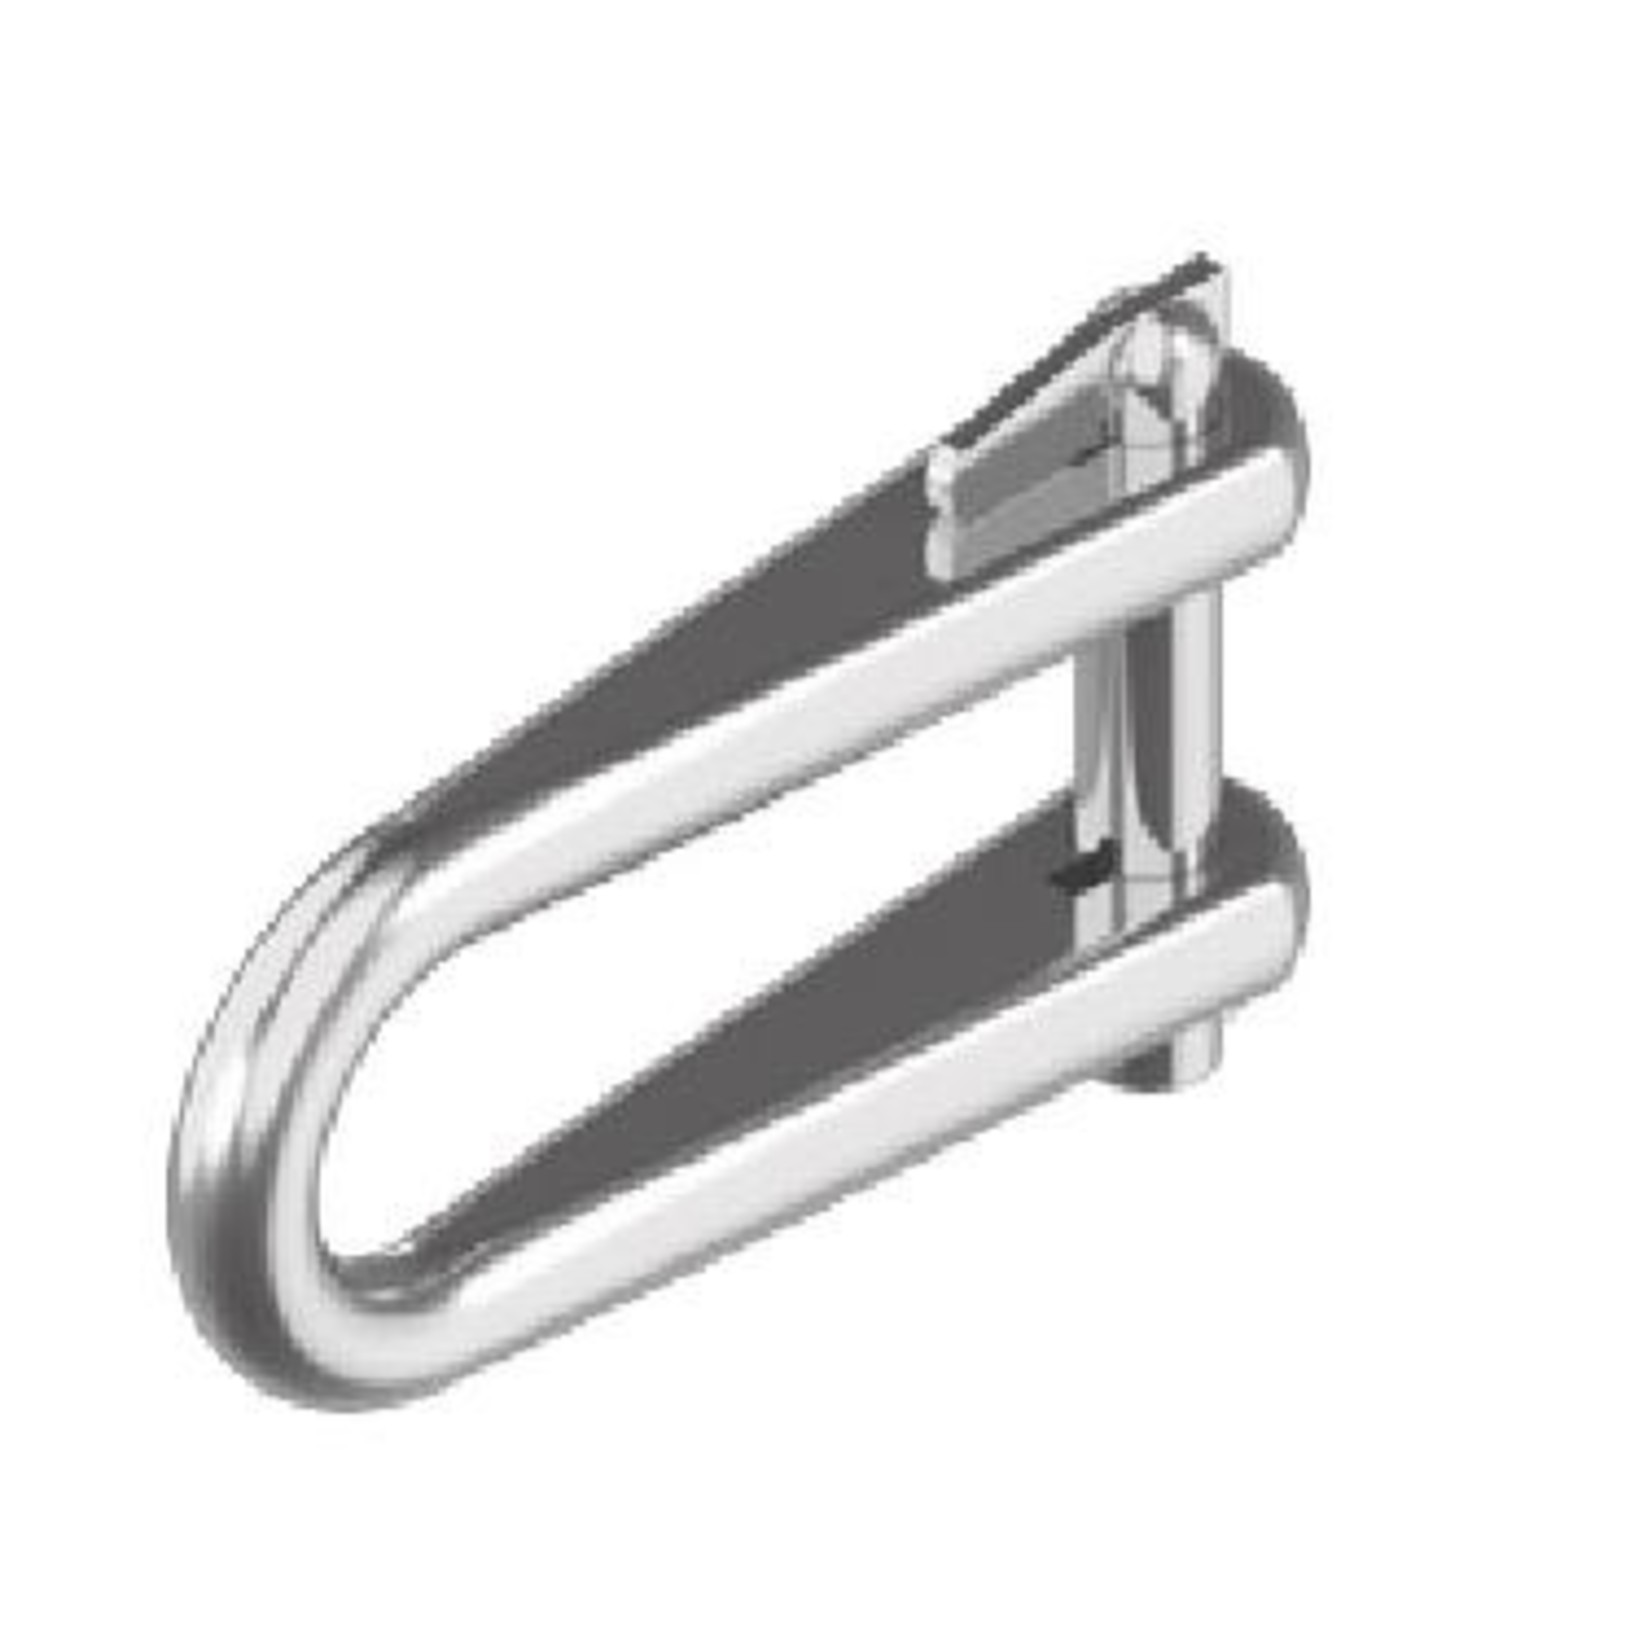 Key pin shackle stainless 5mm 10 pcs